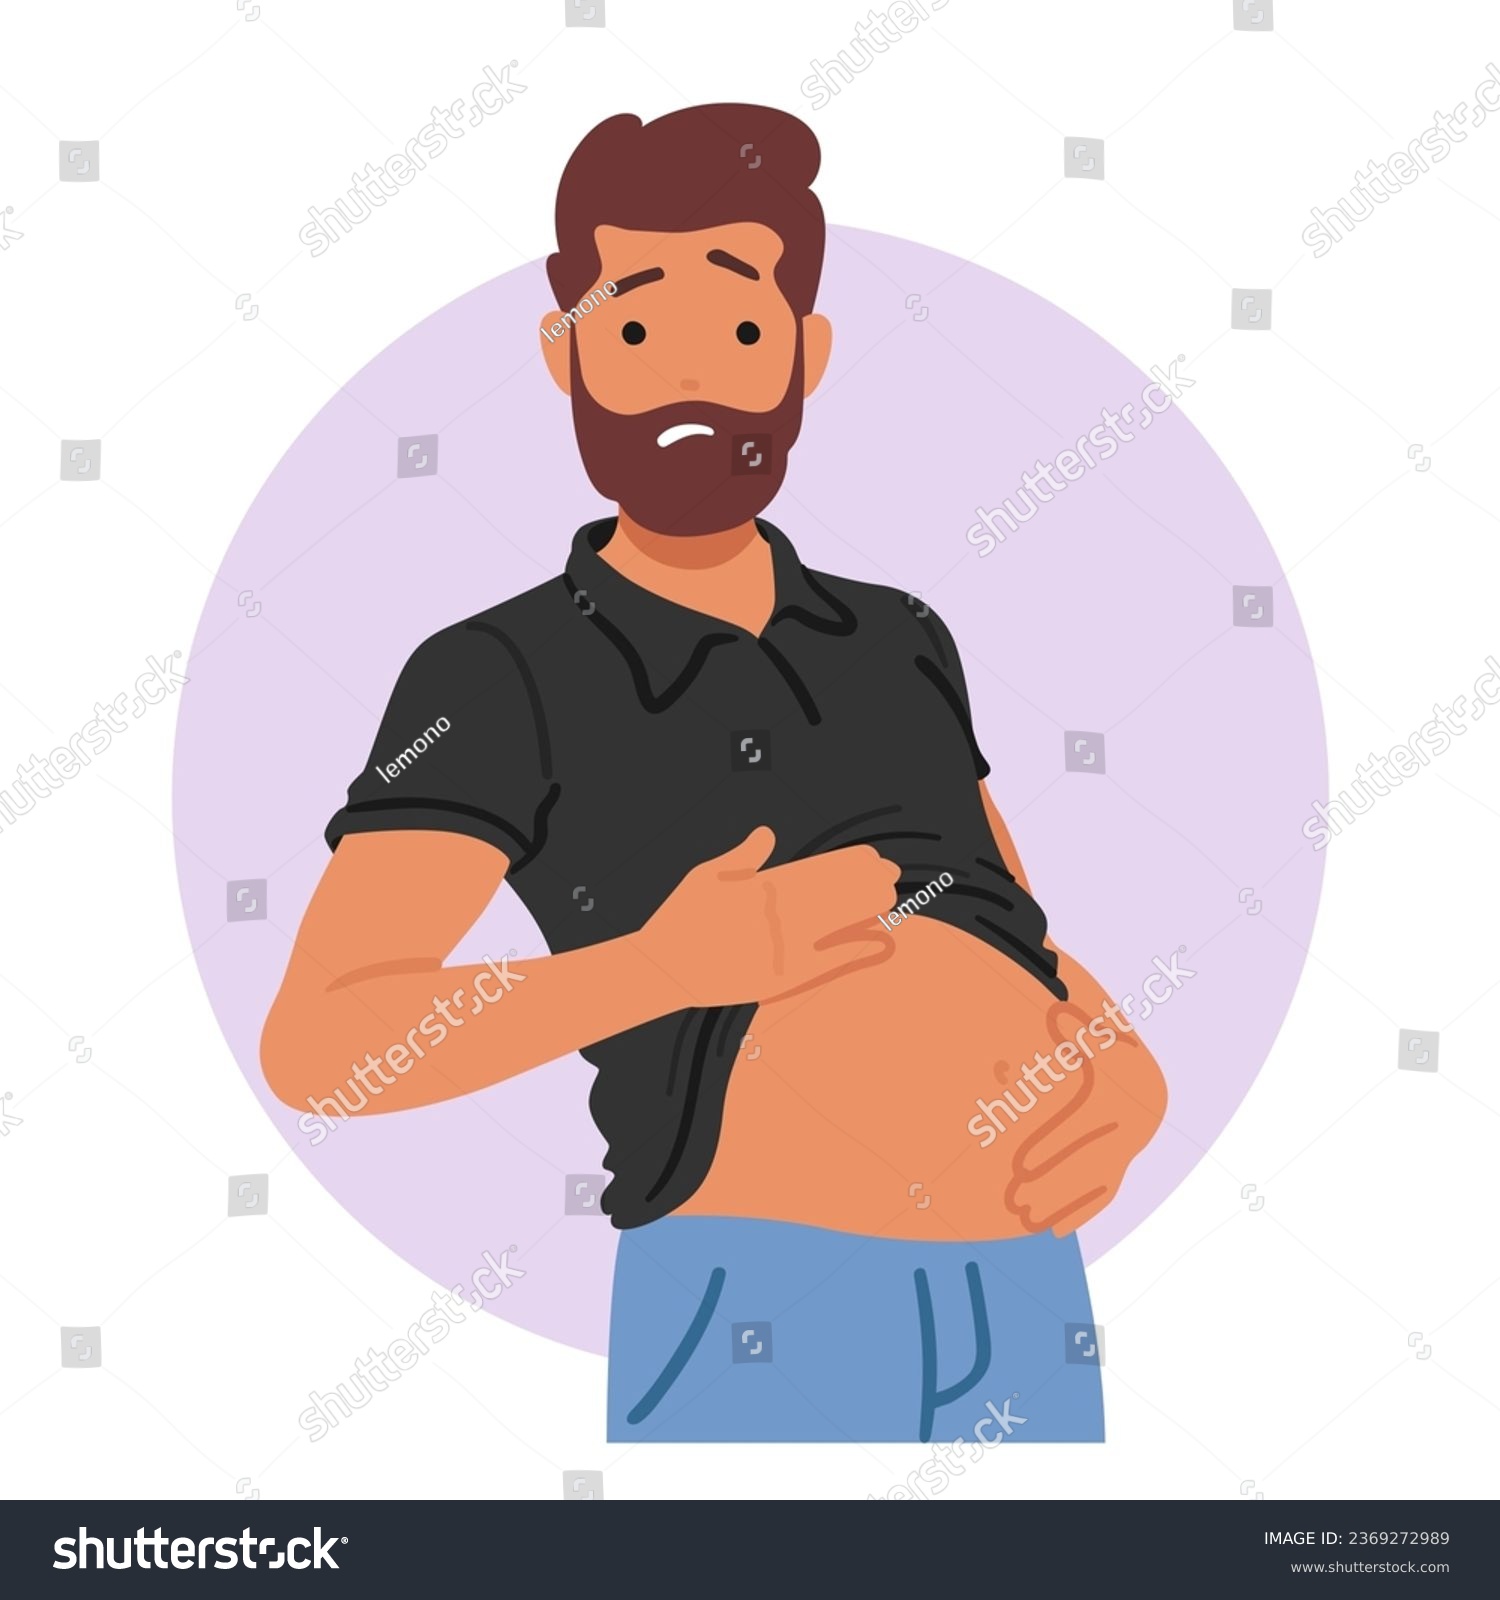 Unhappy Male Character Experiencing Bloating Due To Gastritis Displays Discomfort or Abdominal Distension, Often Stemming From Inflammation Of The Stomach Lining. Cartoon People Vector Illustration #2369272989